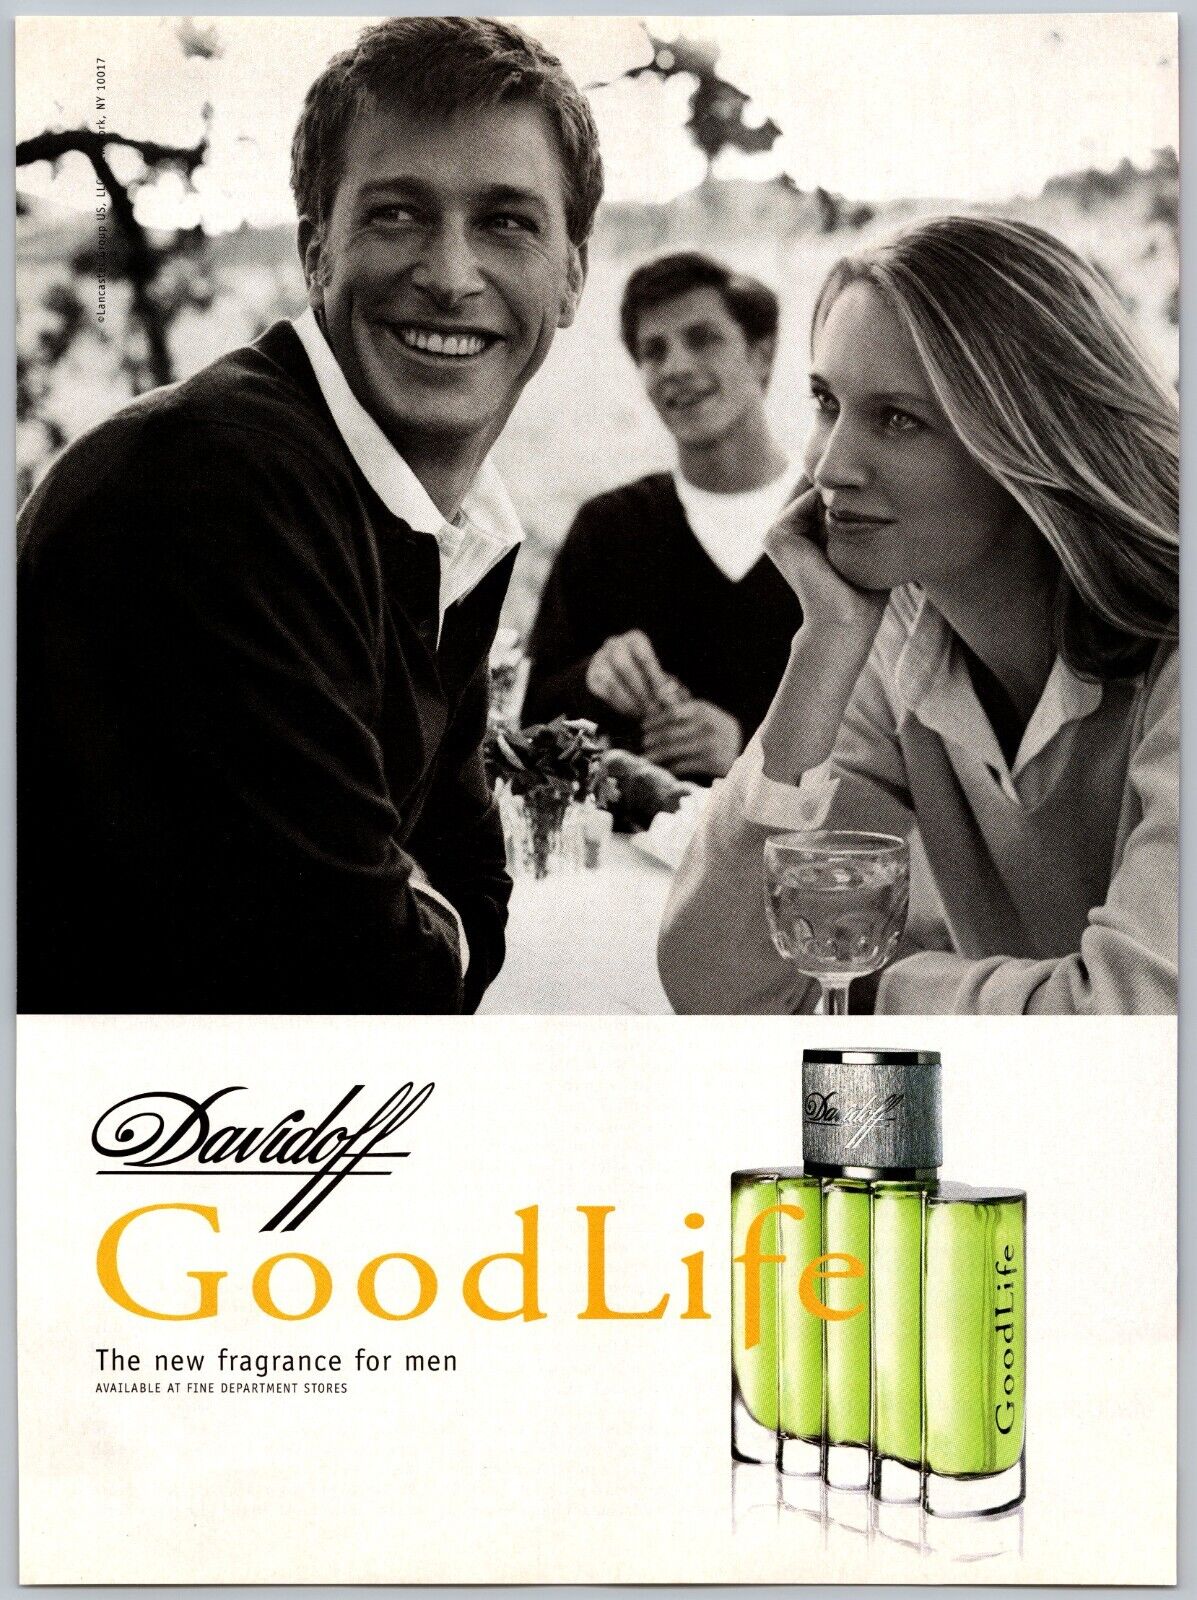 Goodlife Davidoff The New Fragrance For Men Sept, 1999 Full Page Print Ad